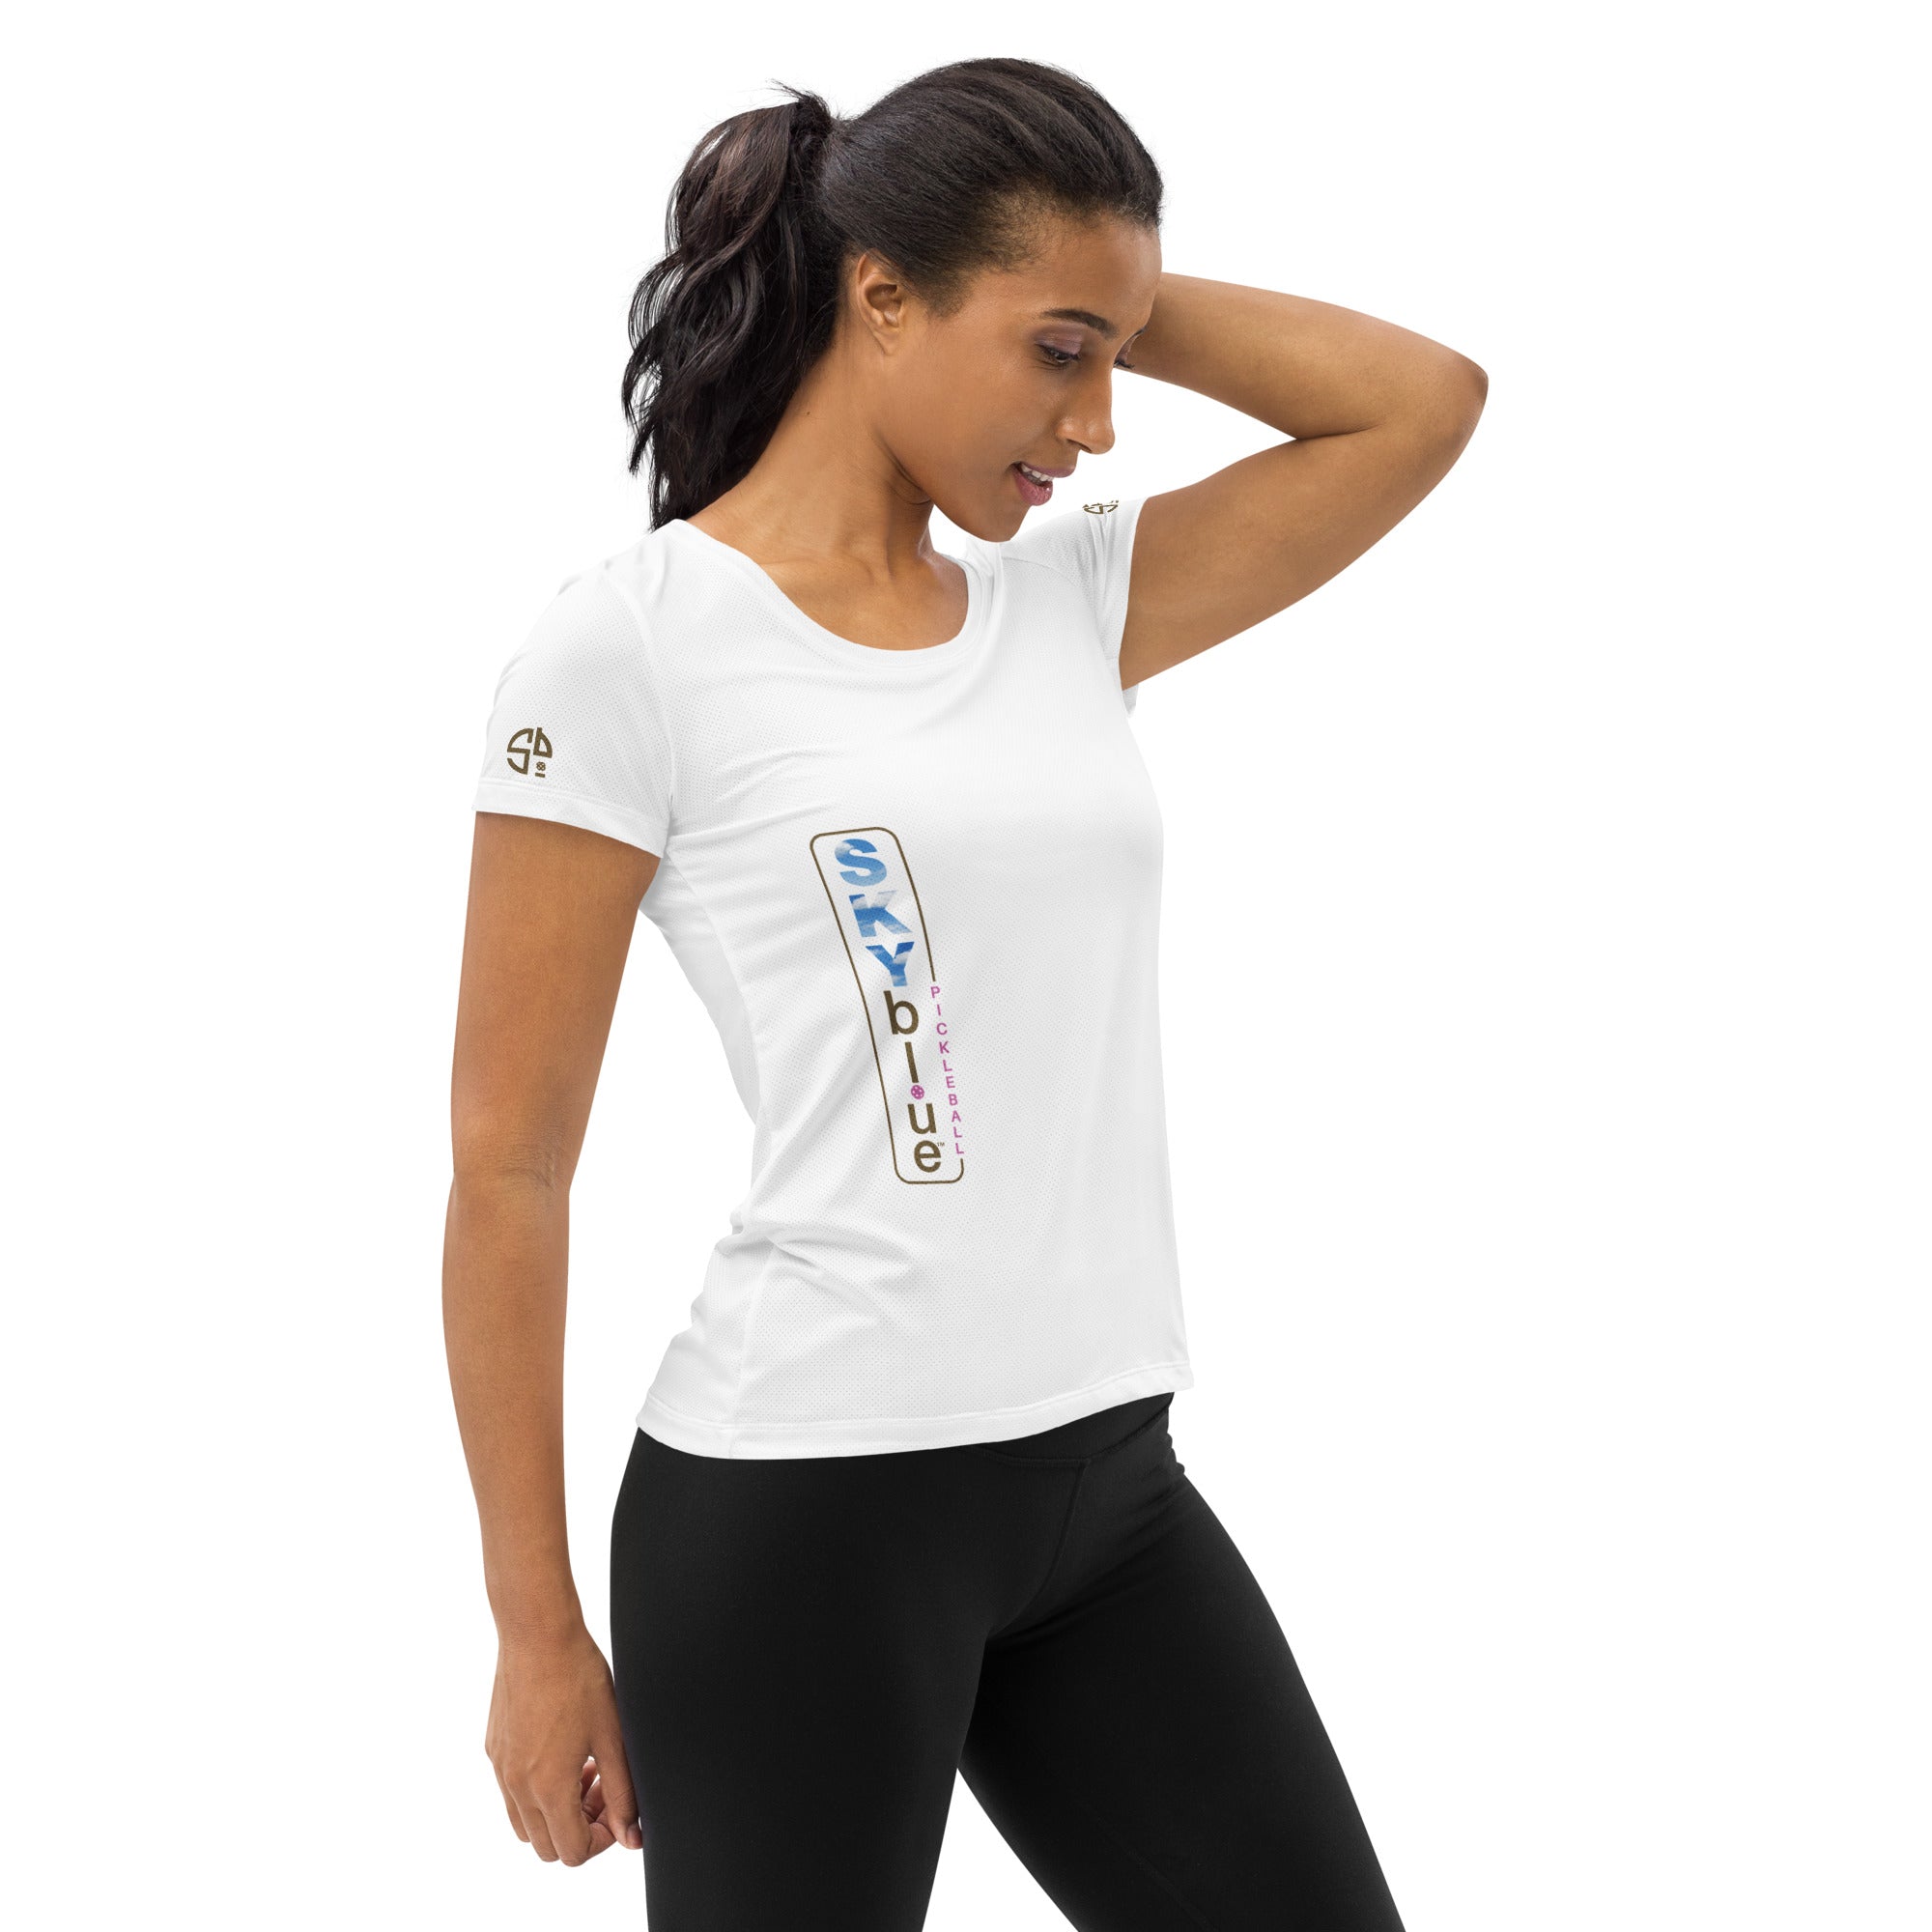 SKYblue™ White Women's Performance Athletic T-Shirt for Pickleball Enthusiasts - Play Pickleball in Style!